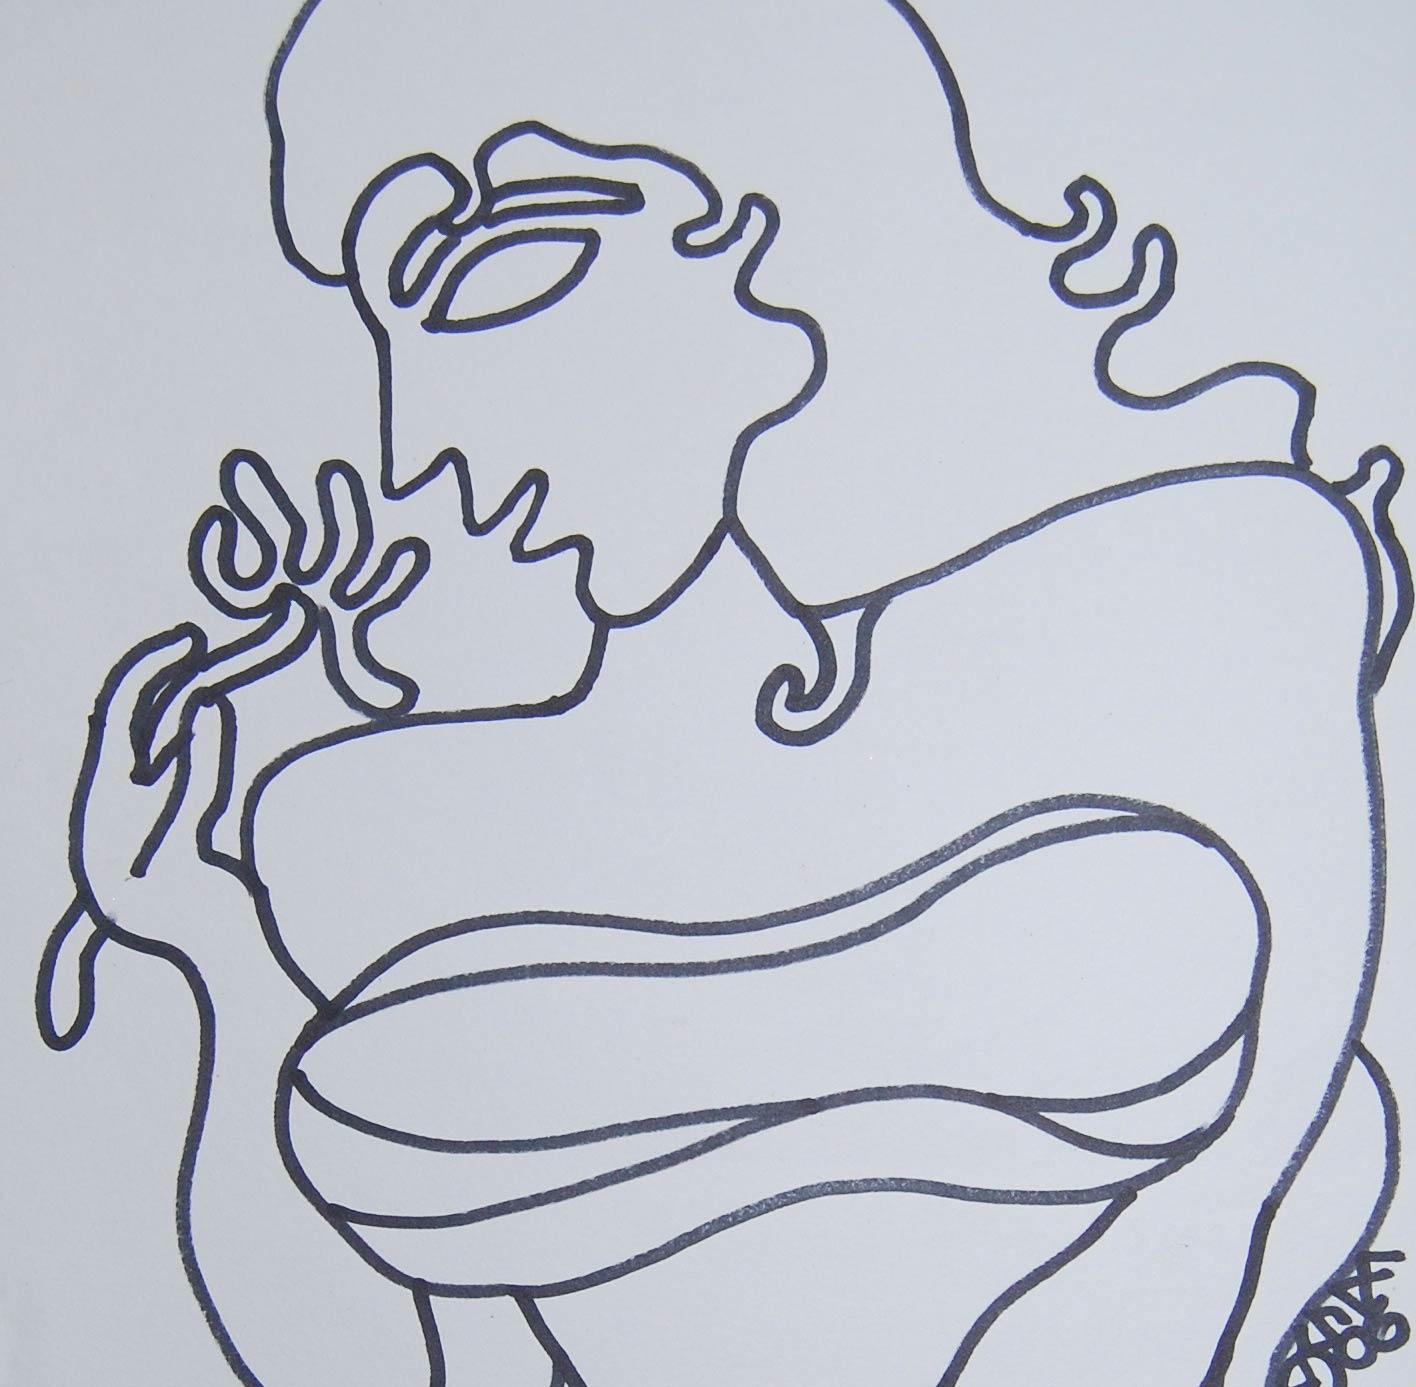 Prakash Karmakar – Lady with flower – 14.5 x 11 inches (unframed size)  
Ink on paper  
Signed lower right in Bengali
Inclusive of shipment in roll form.          

Style : Legendary master artist Lt. Prakash Karmakar from Bengal was solely